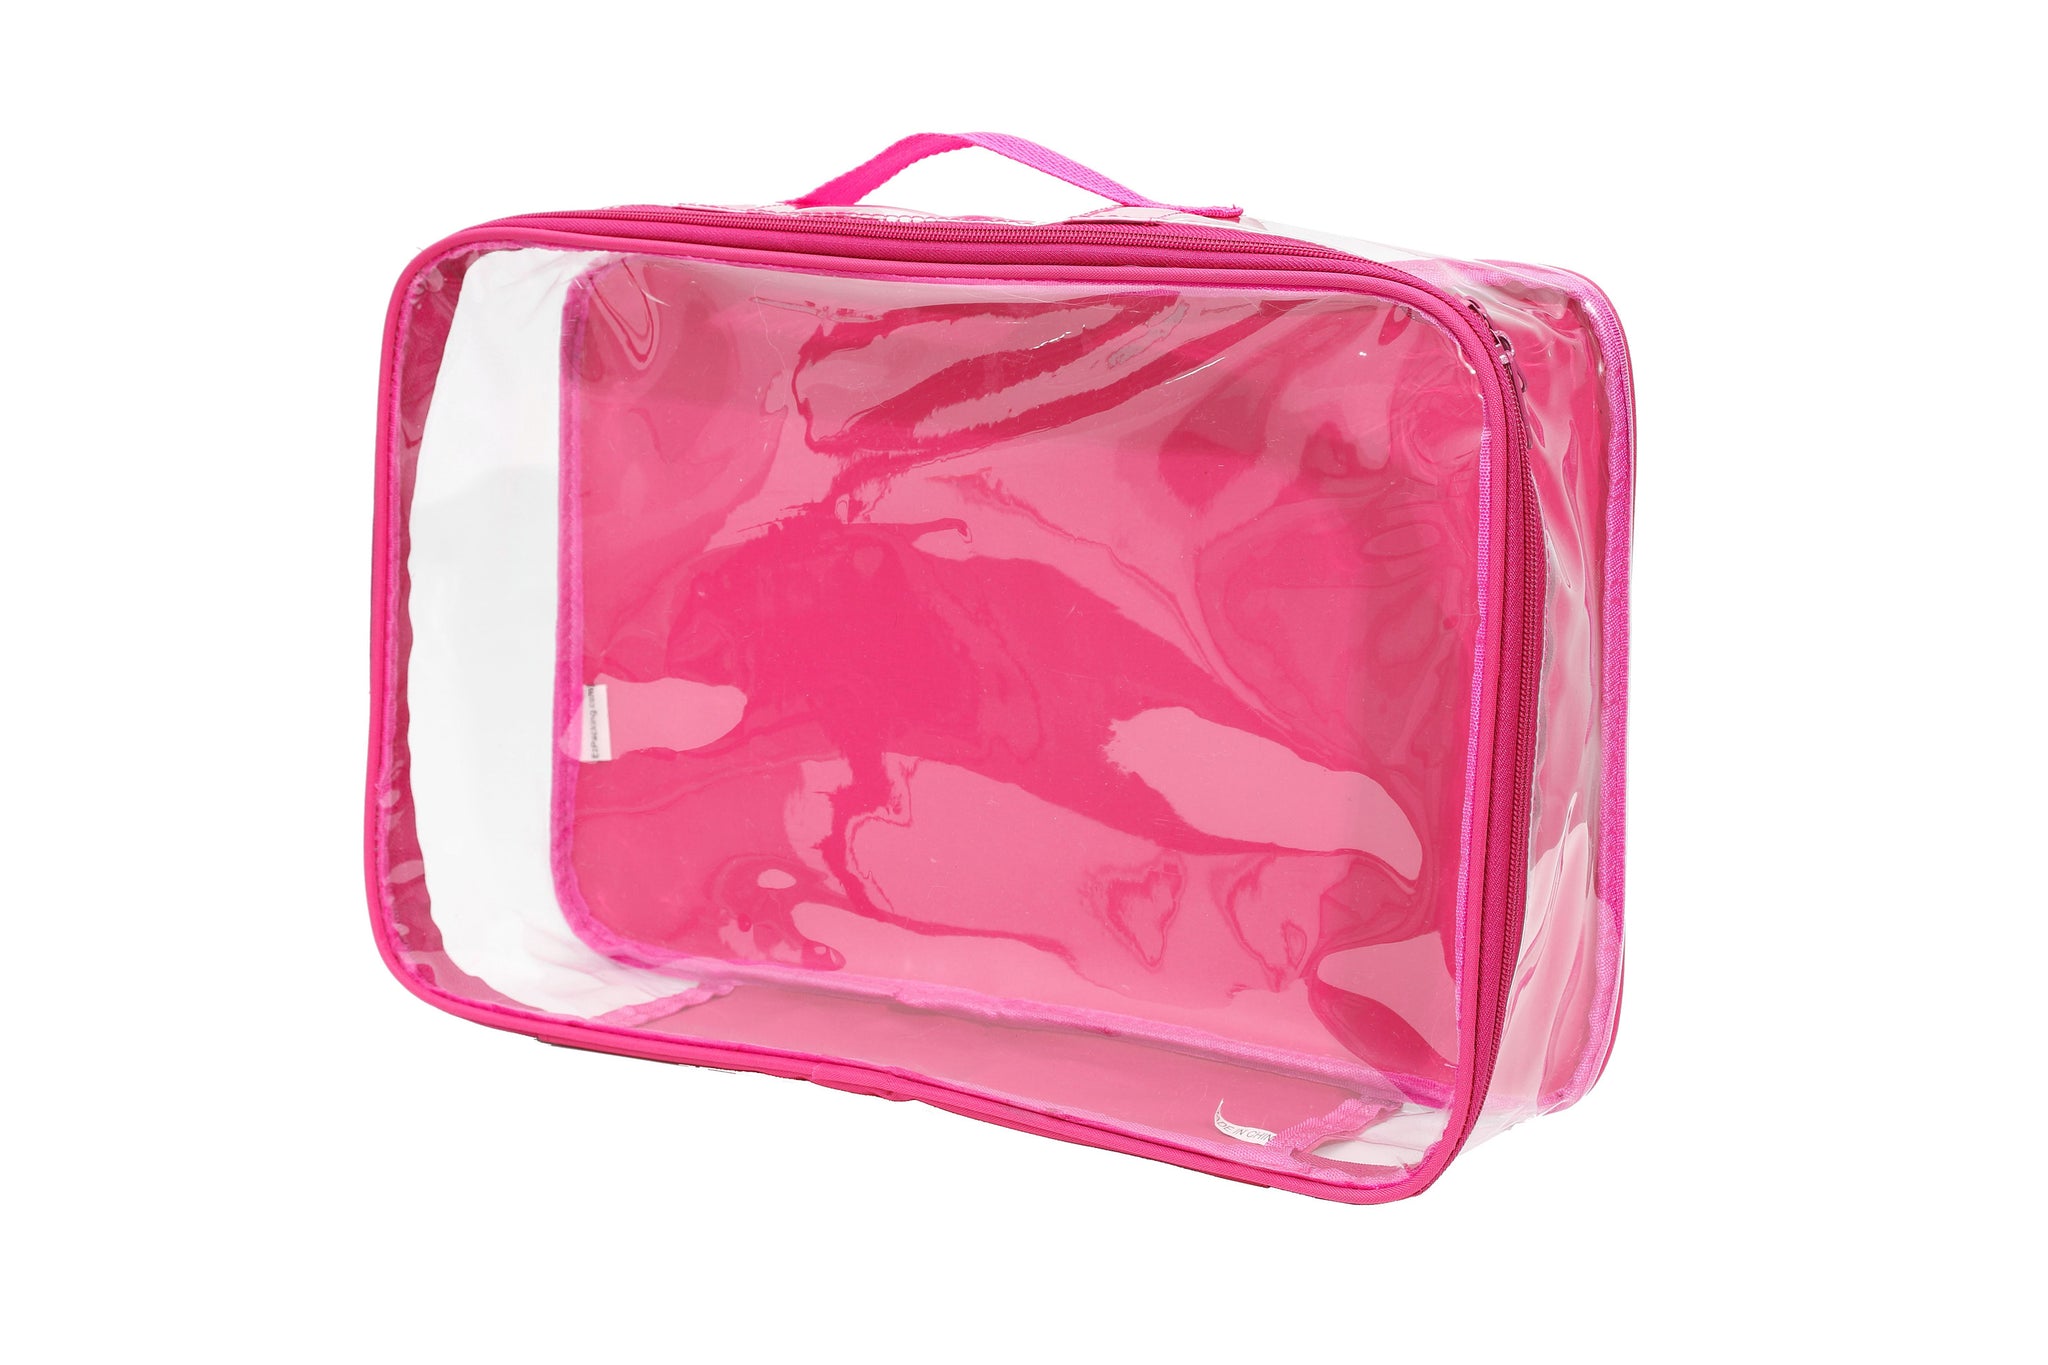 Large Packing Cube for Travel - Clear Suitcase Organizer Pouch with ...